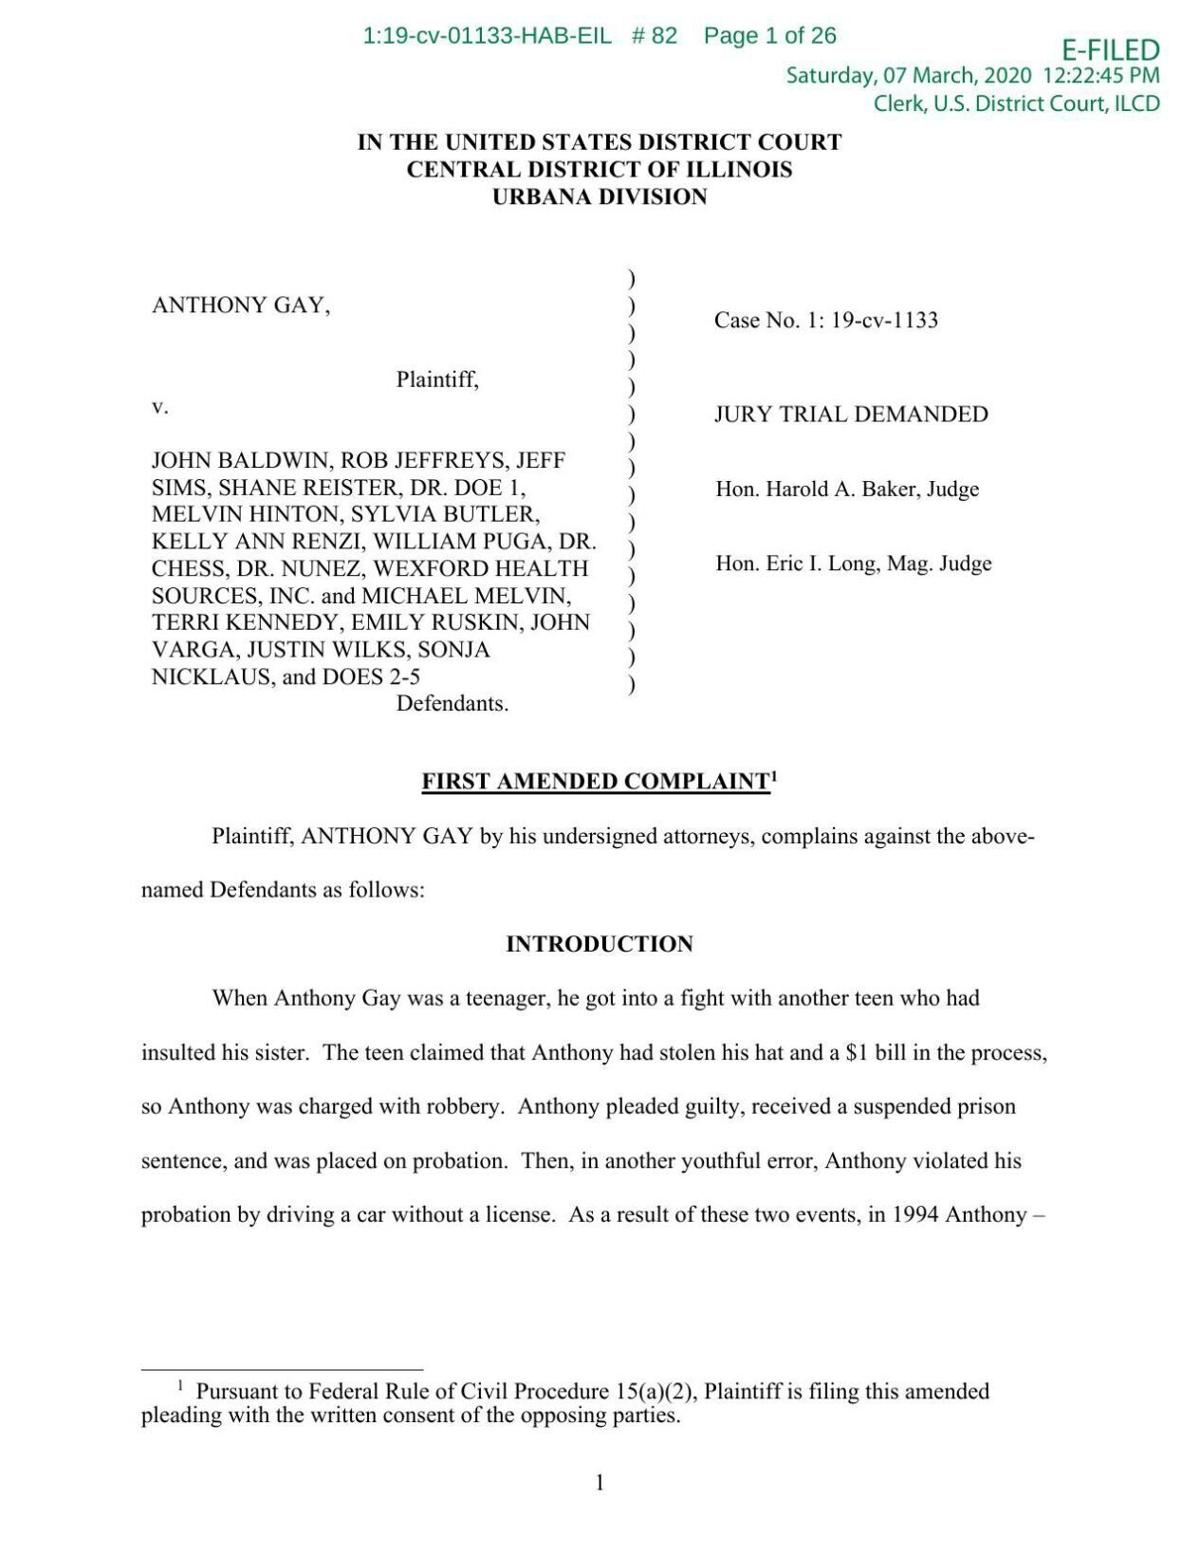 Anthony Gay lawsuit